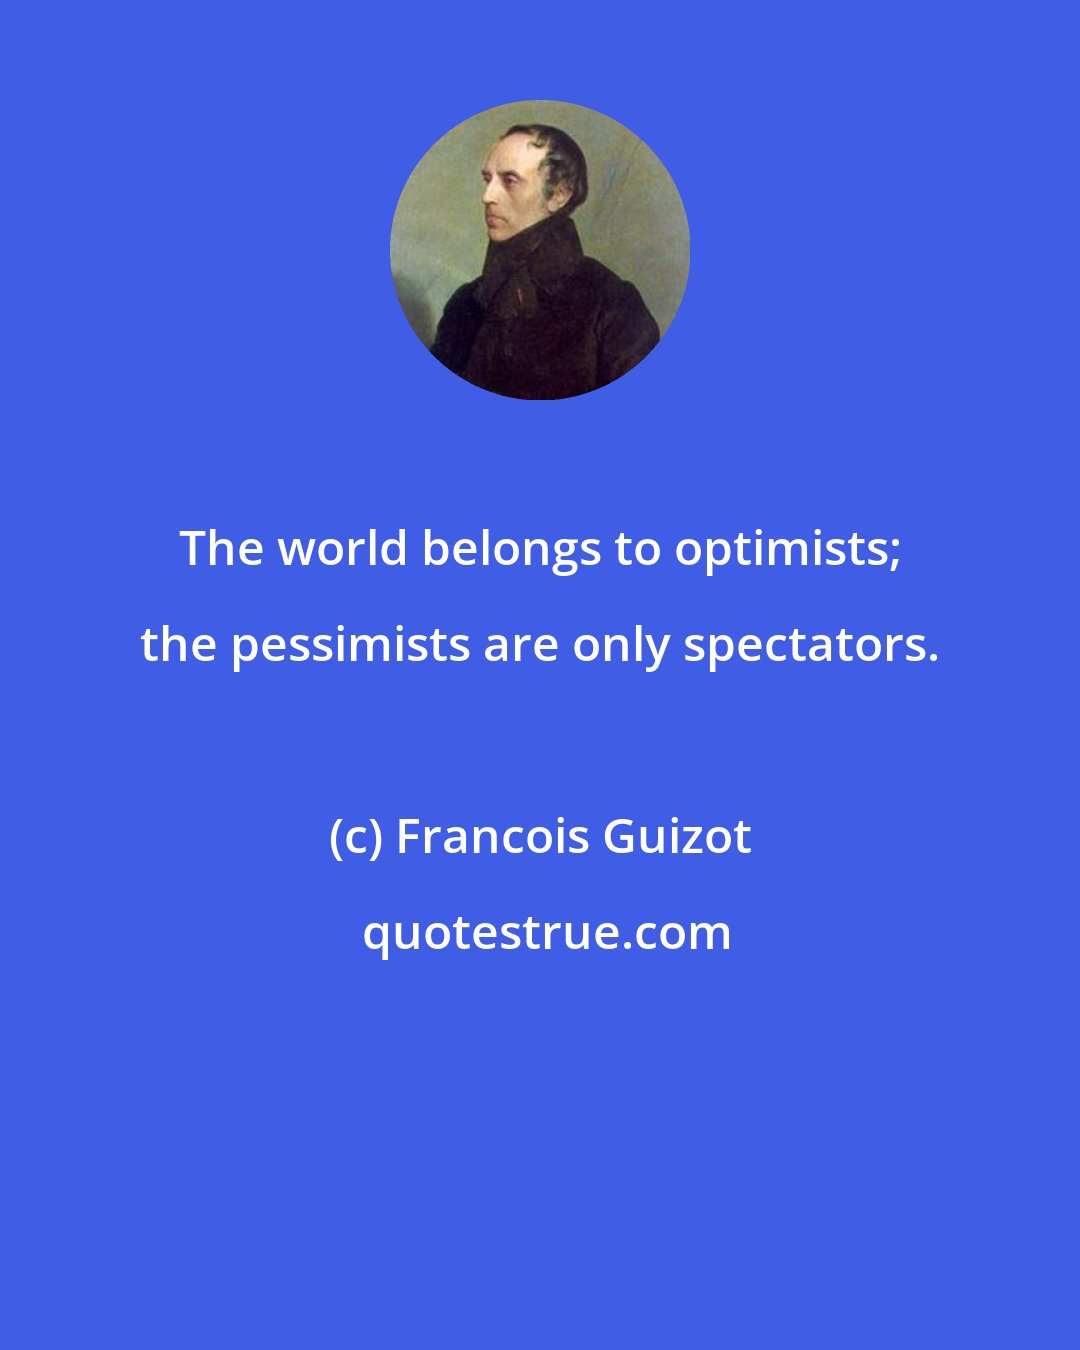 Francois Guizot: The world belongs to optimists; the pessimists are only spectators.